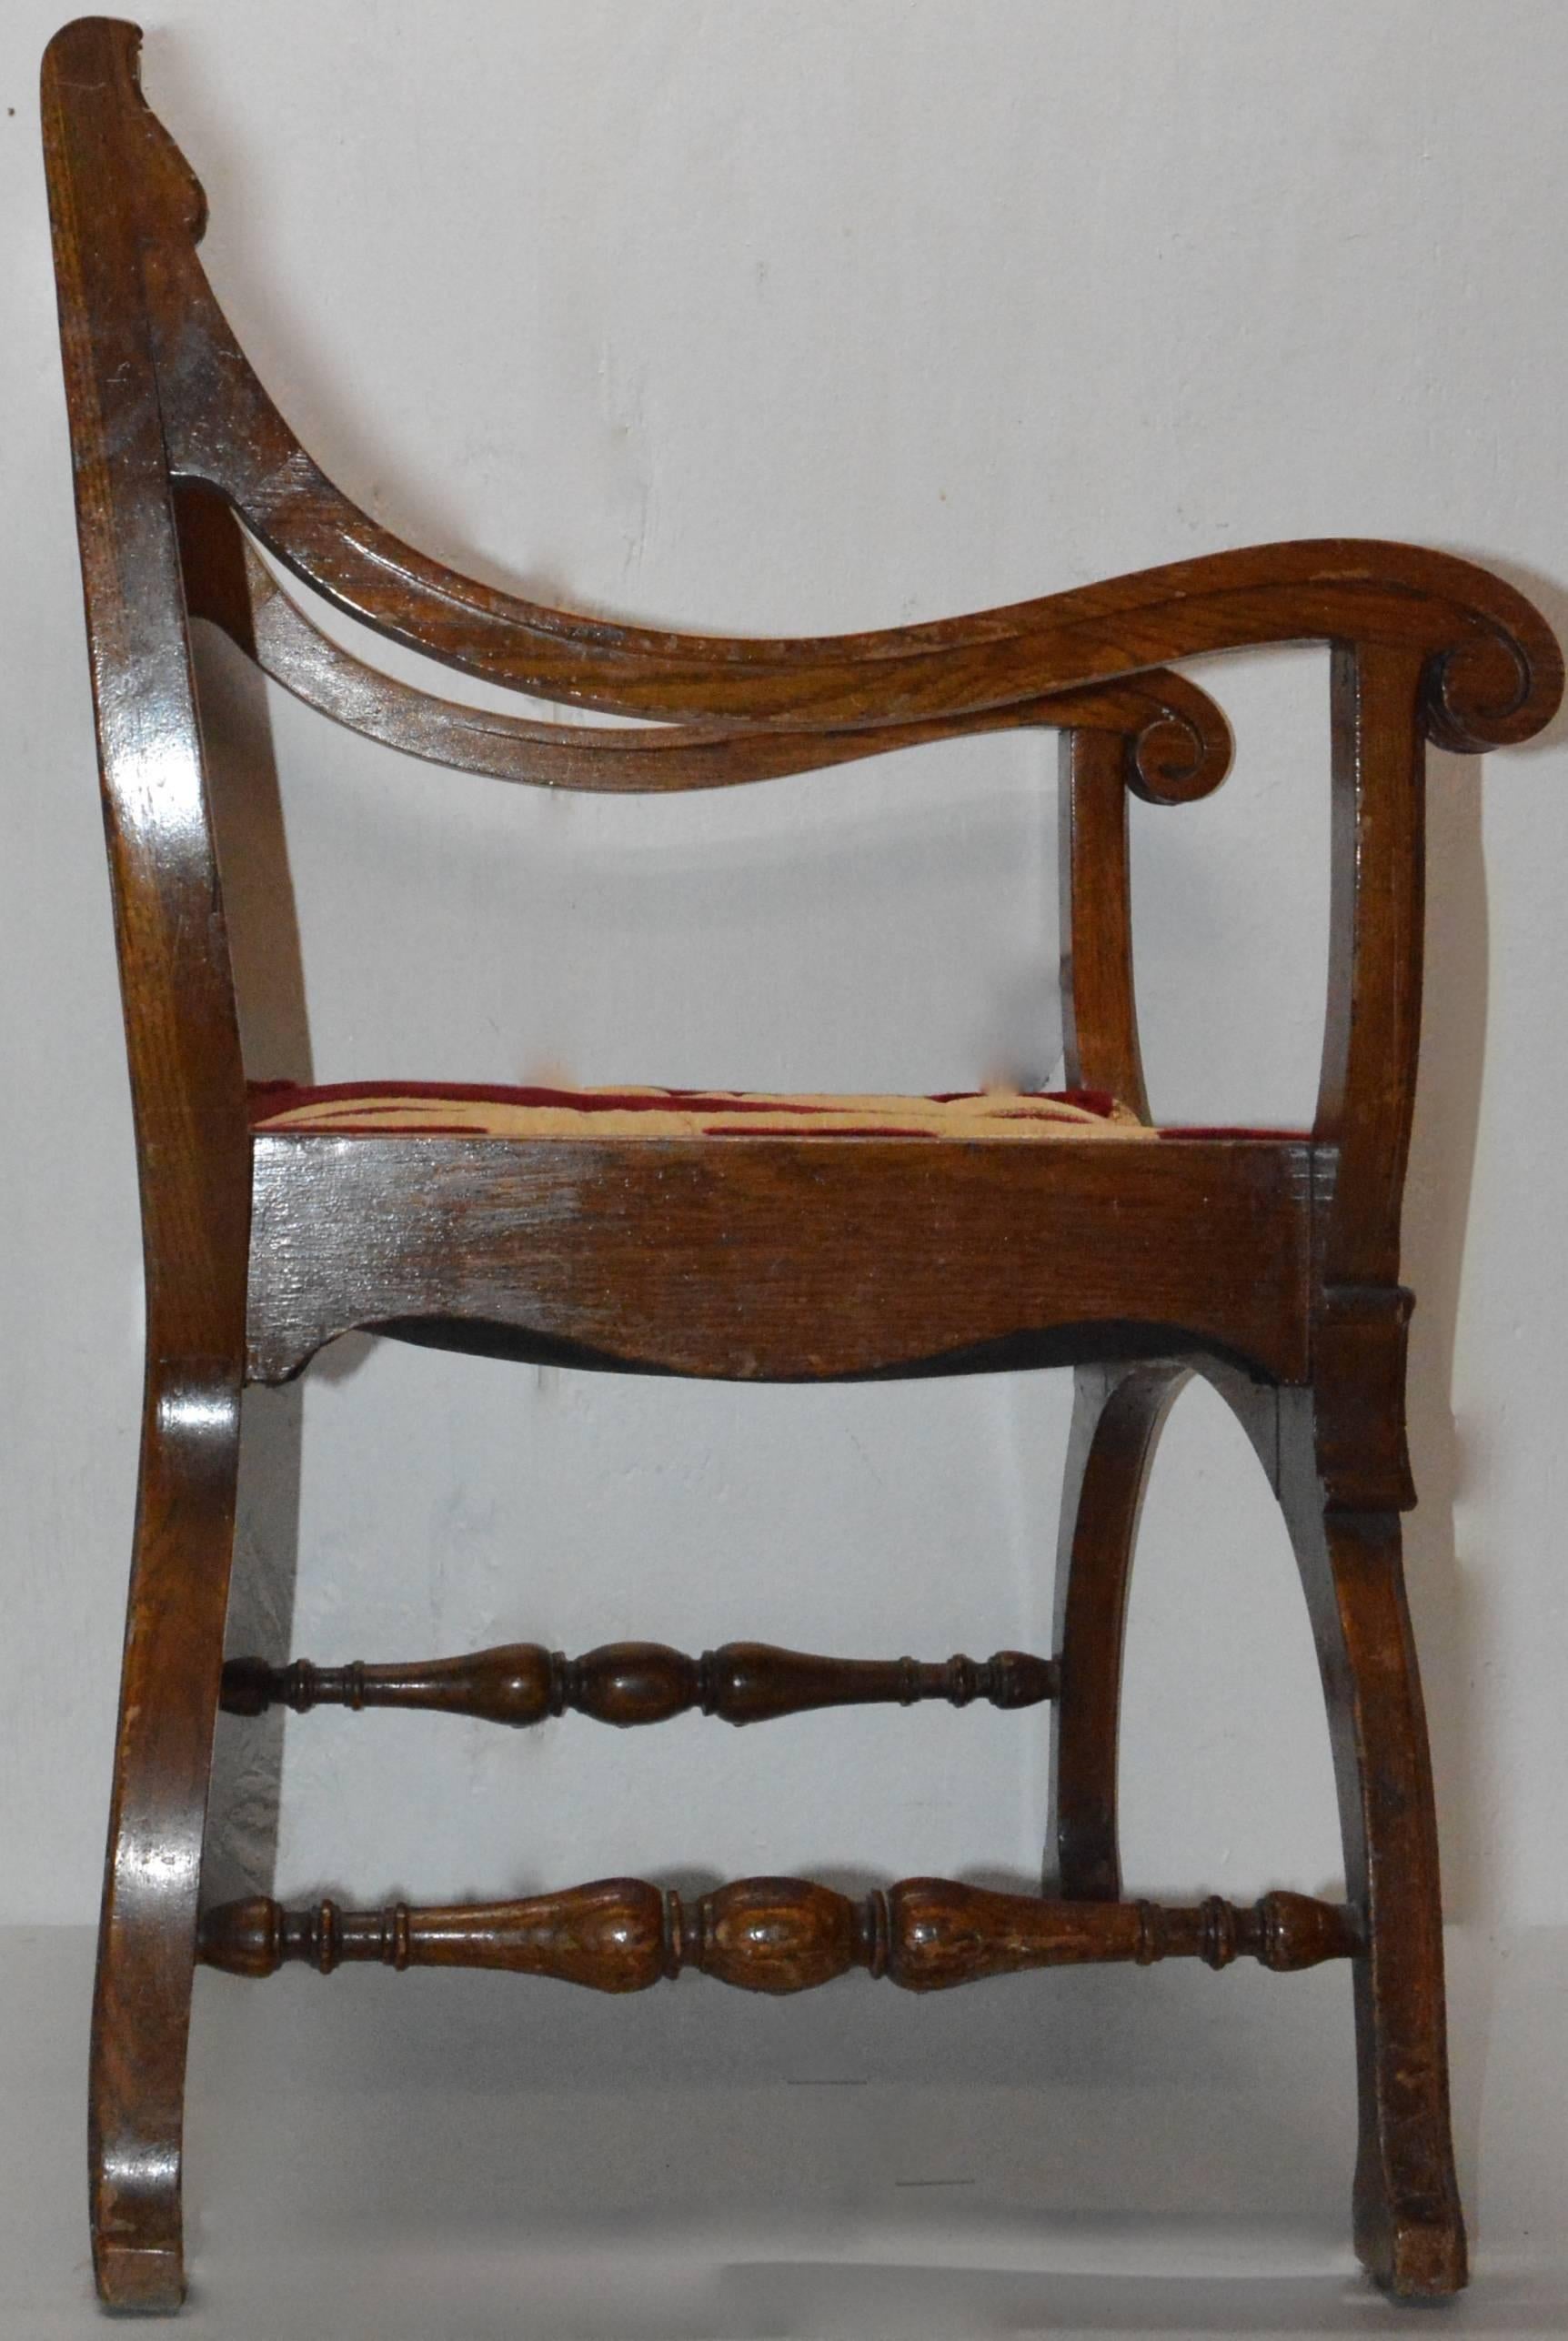 We are offering a wood and fabric chair from the 19th century. It has an intricate inlay design on the back of the chair with lovely scrollwork in the wood. The chair sits on curved legs with turned spindles connecting them. The arms have a ribbed